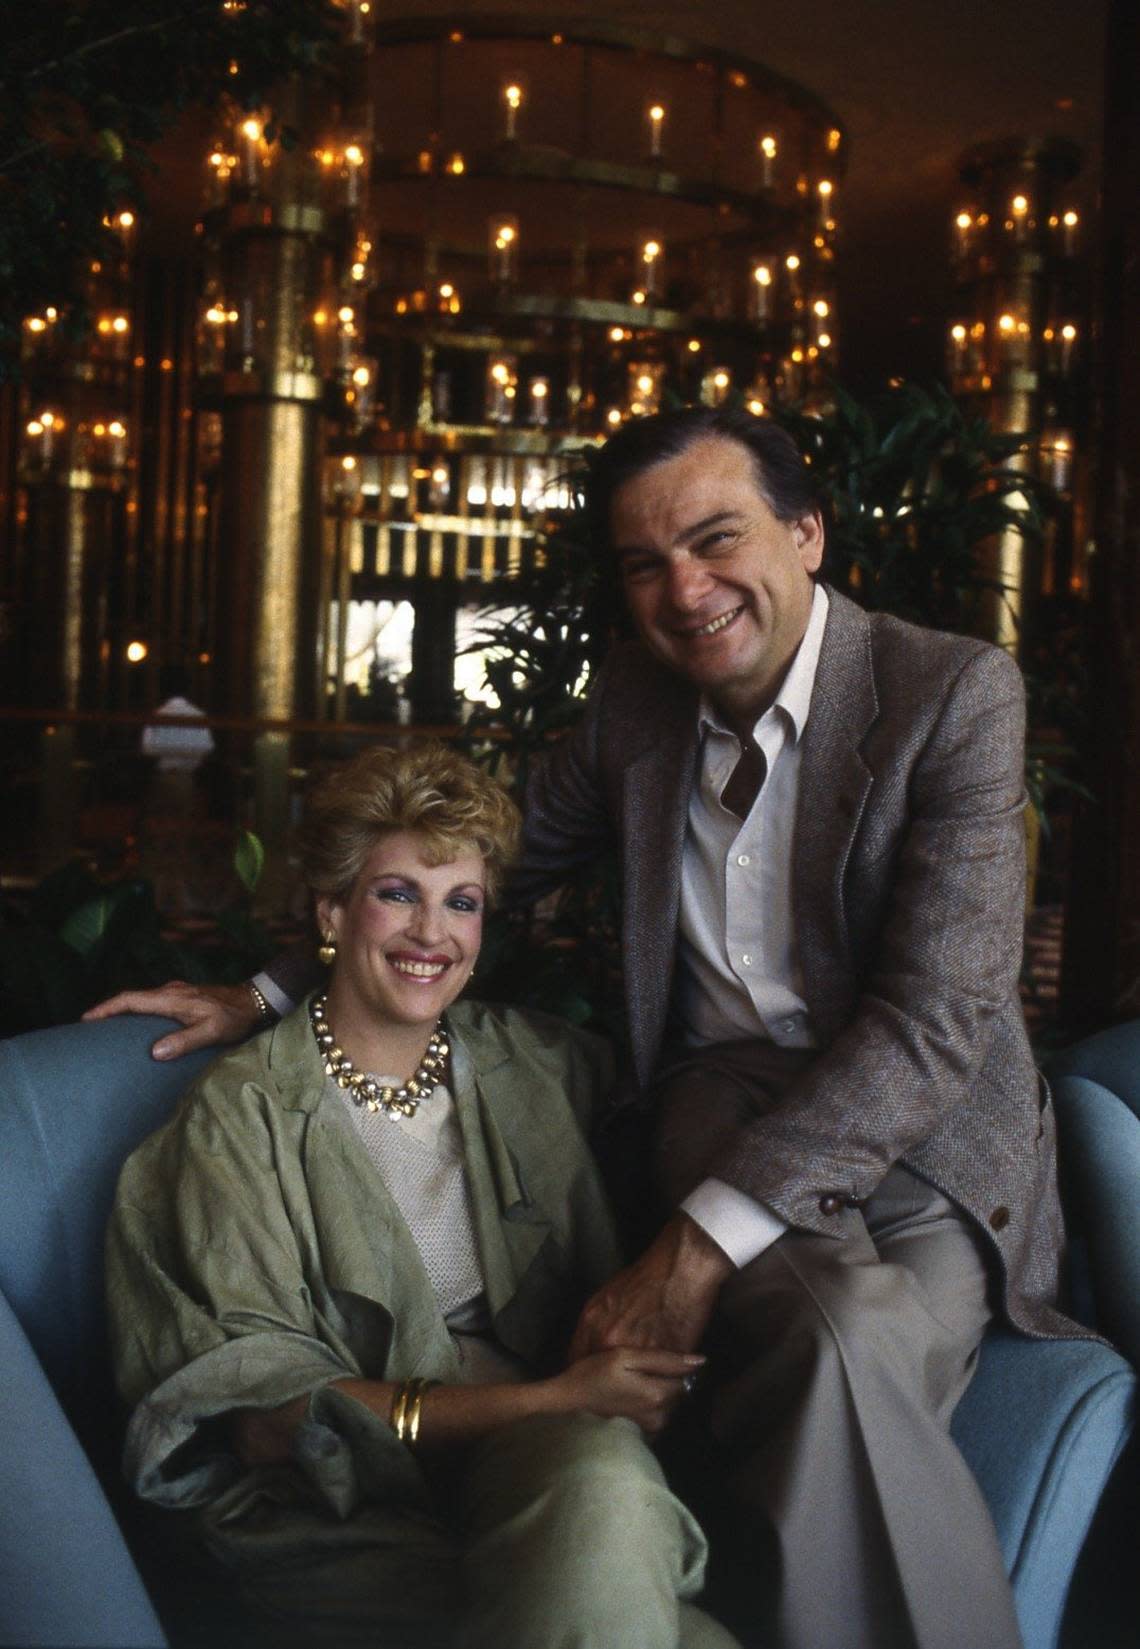 Irving and Marge Cowan, owners of Diplomat hotel in Hollywood